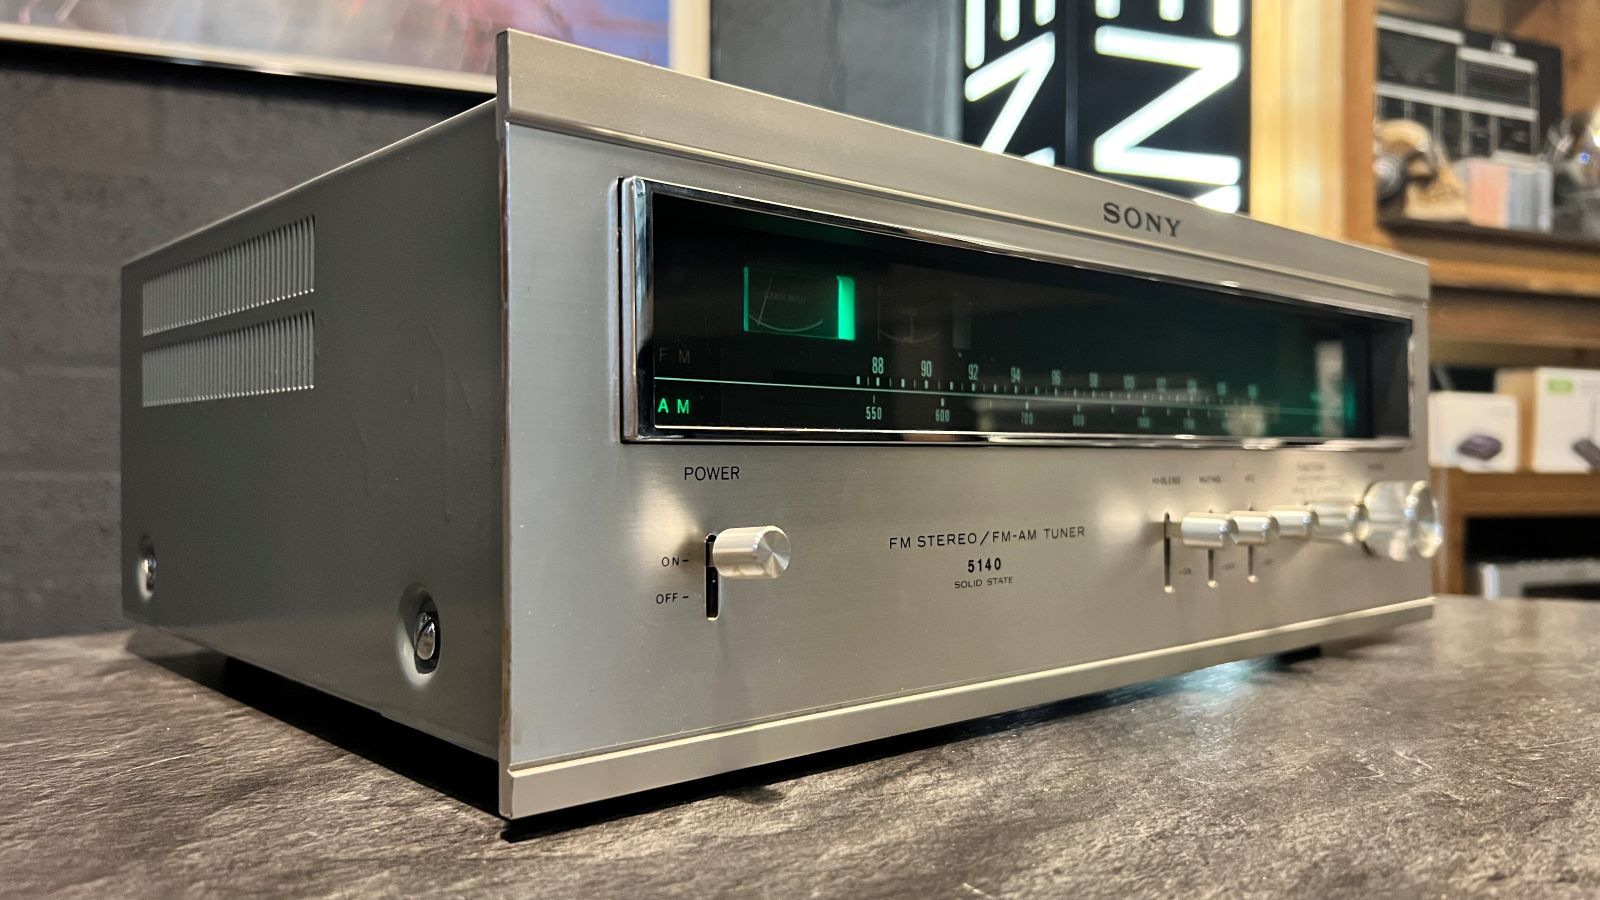 Sony ST-5140 AM/FM-stereotuner (1971-1974)